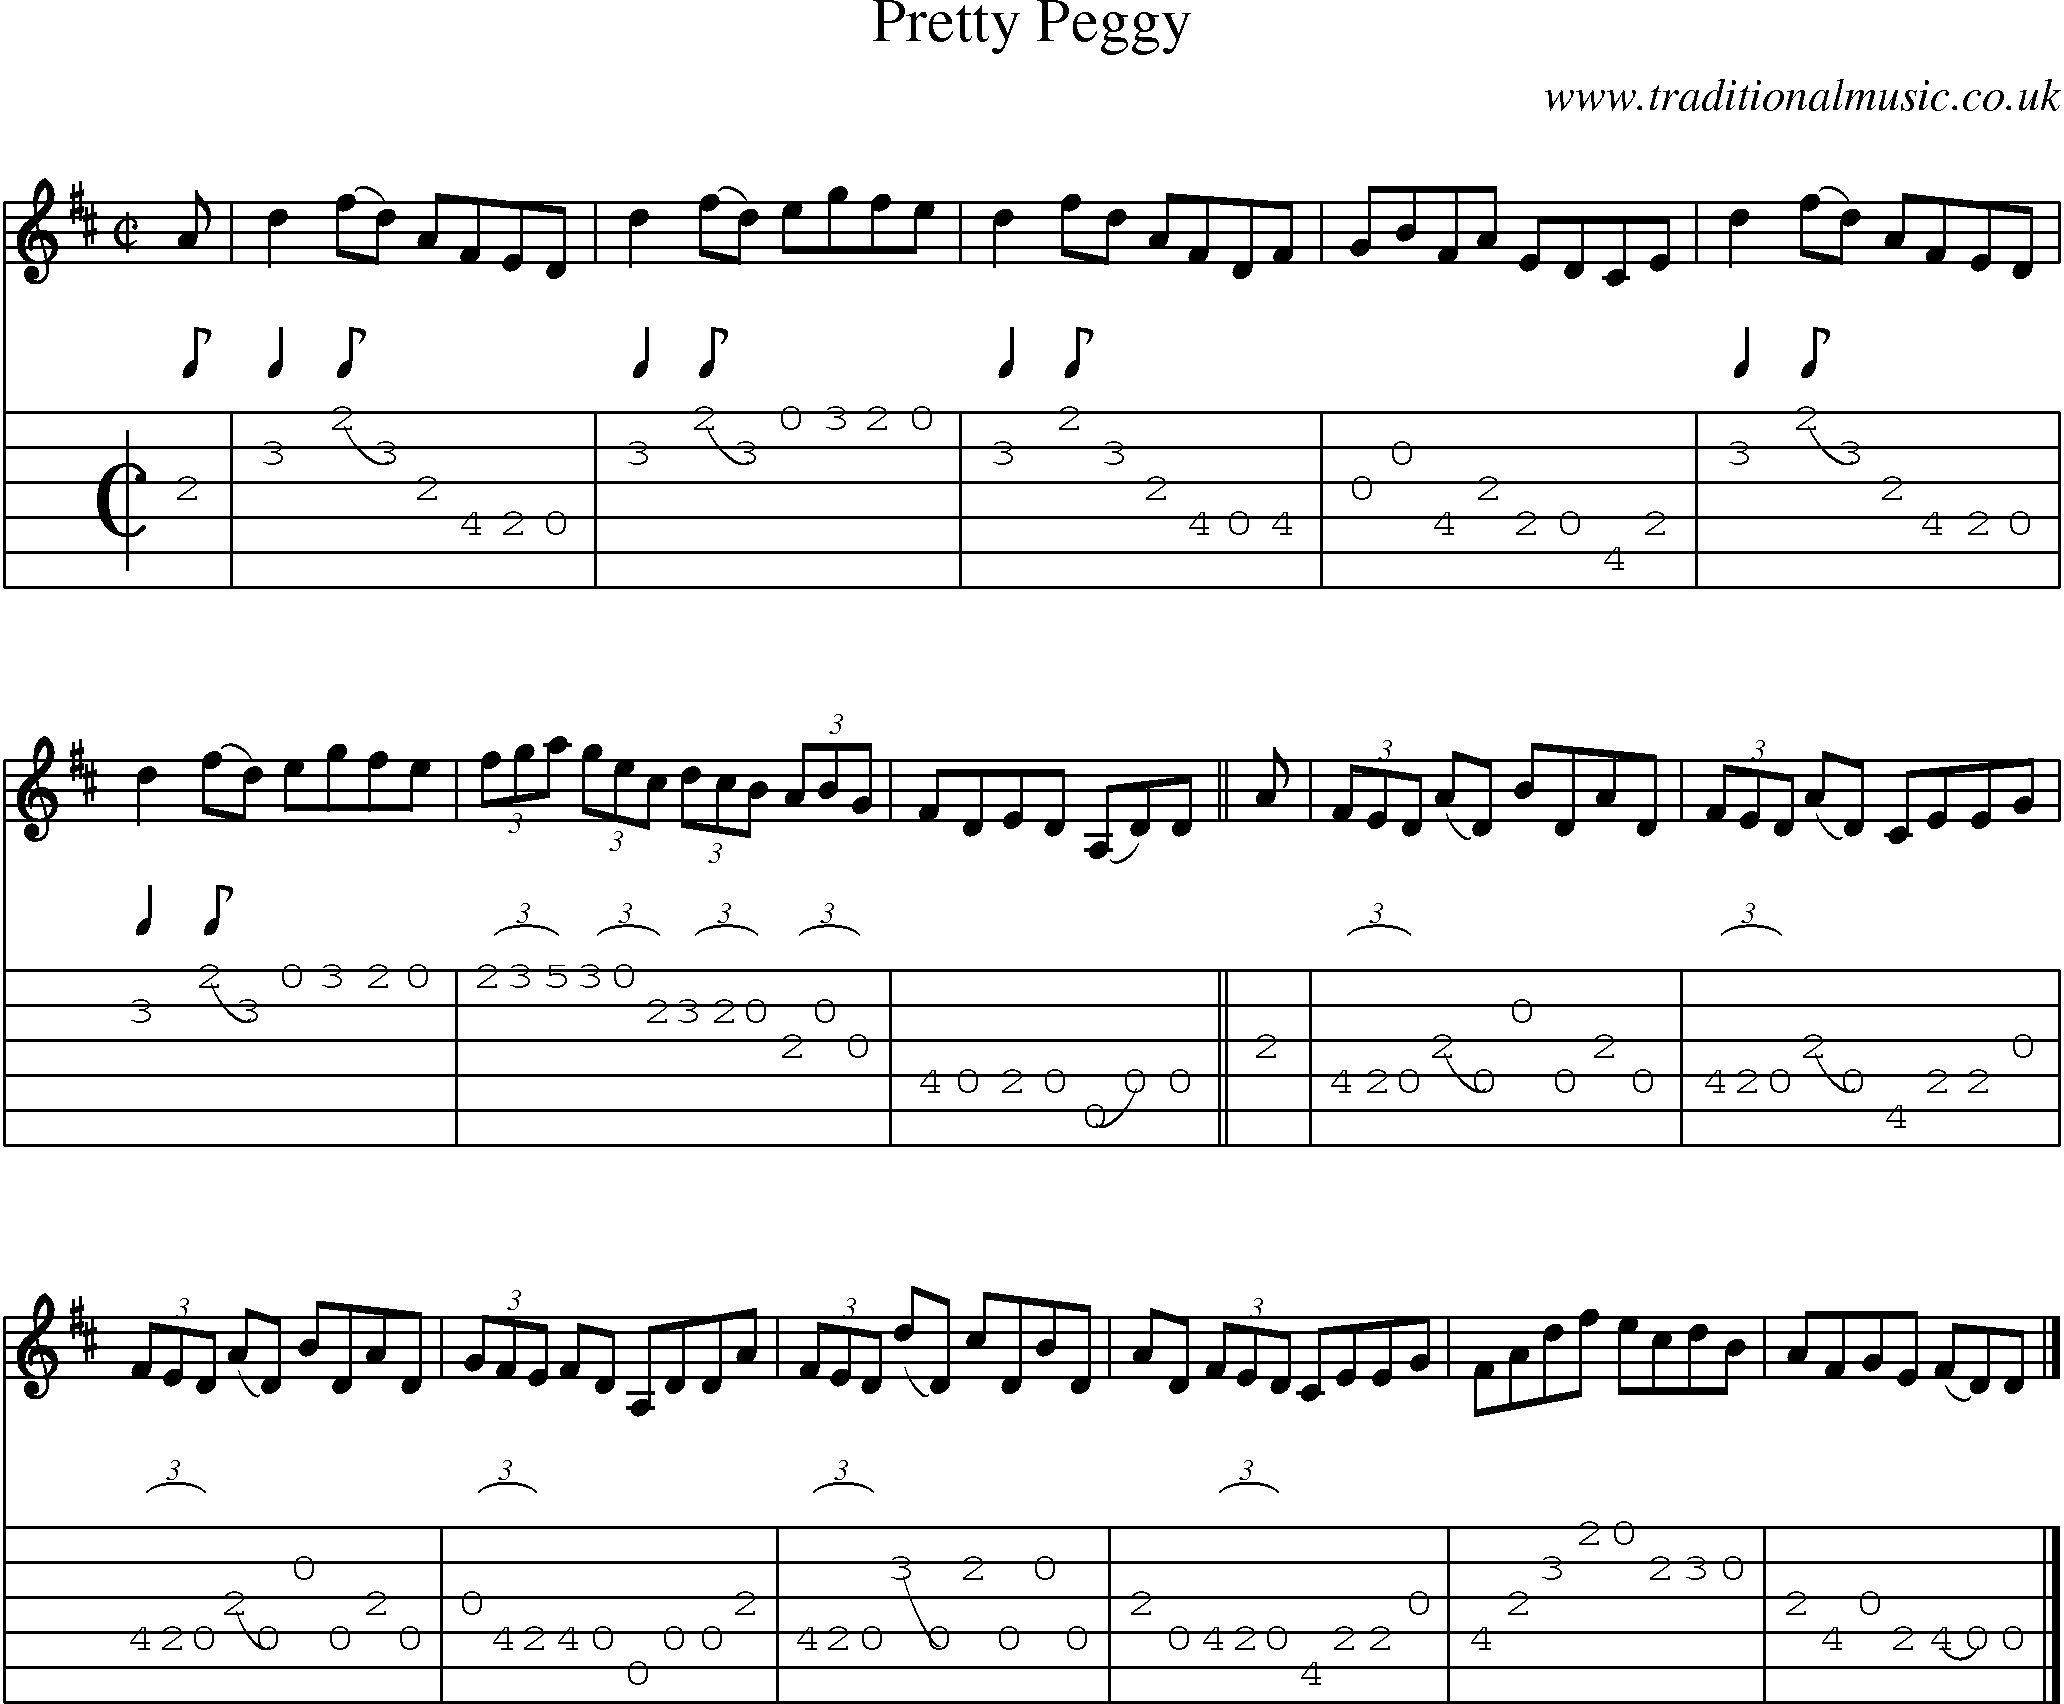 Music Score and Guitar Tabs for Pretty Peggy